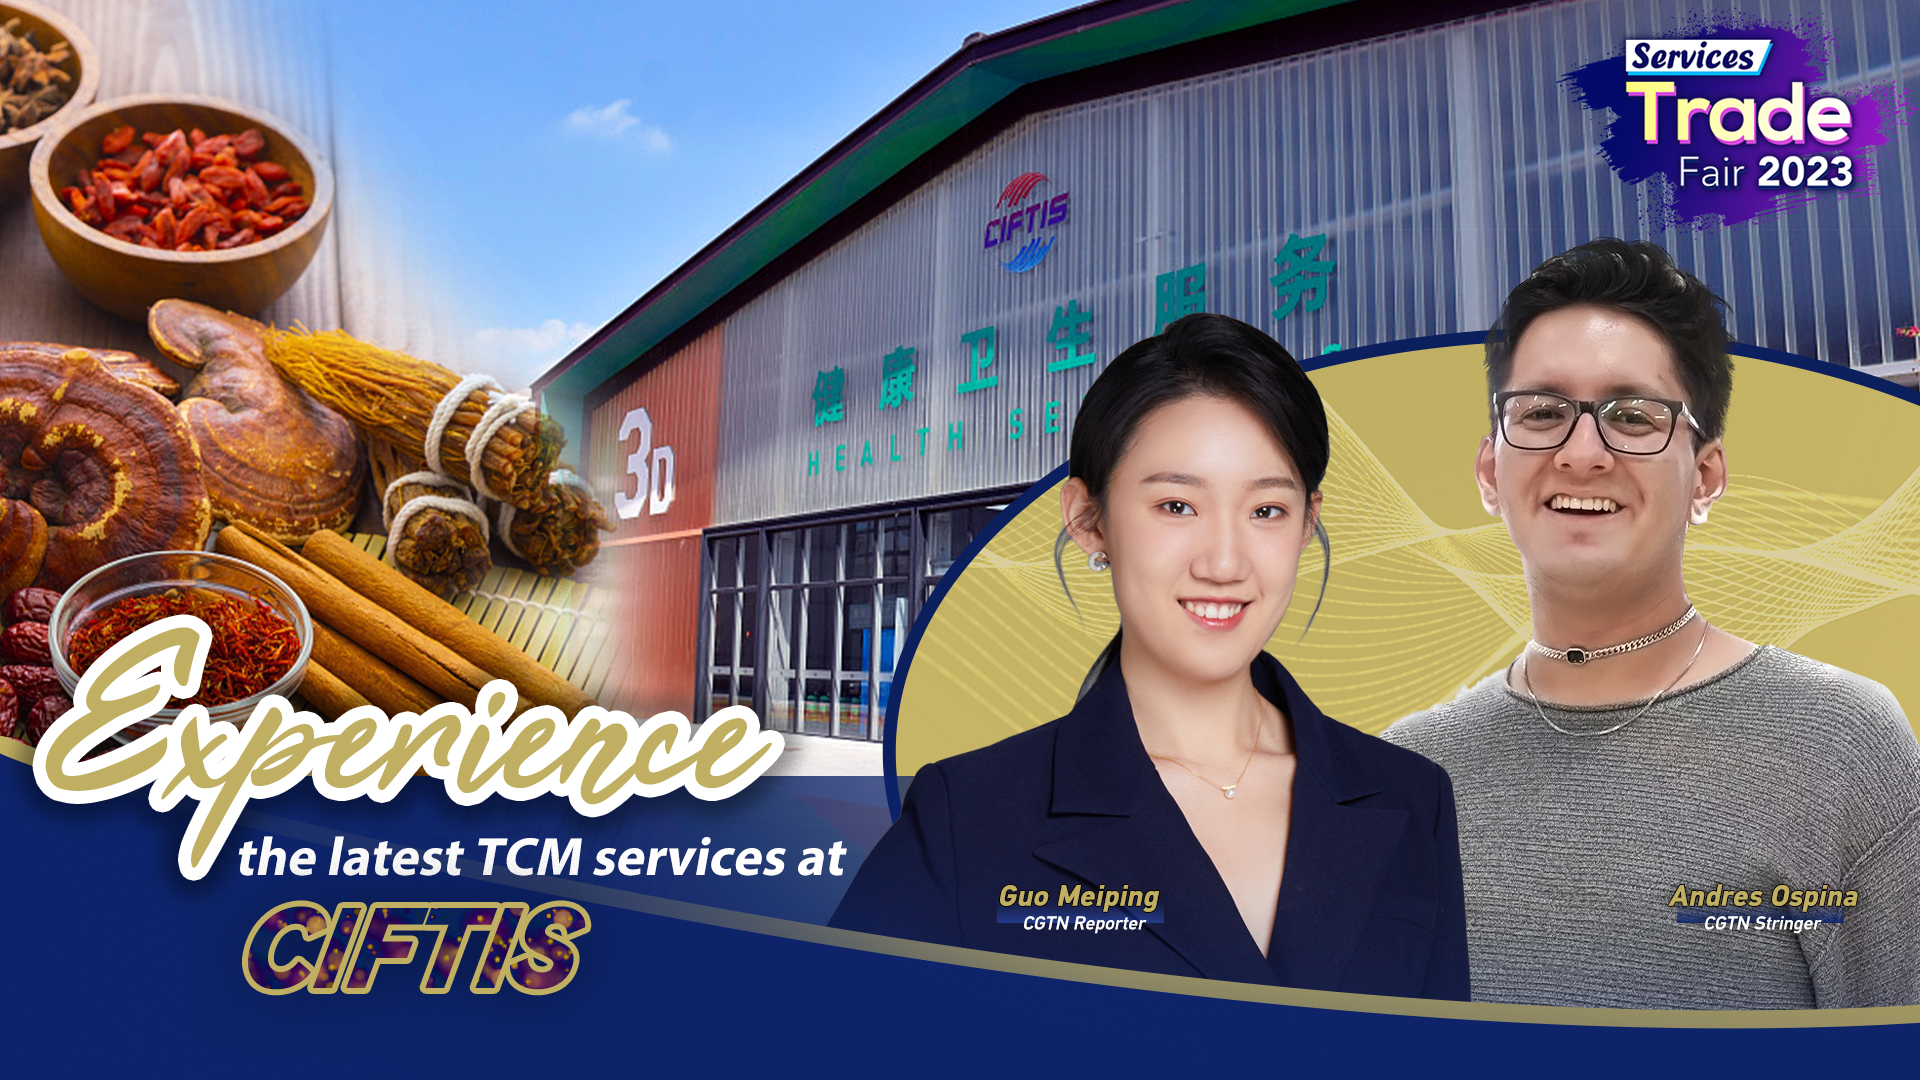 Live: Experience the latest TCM services at CIFTIS